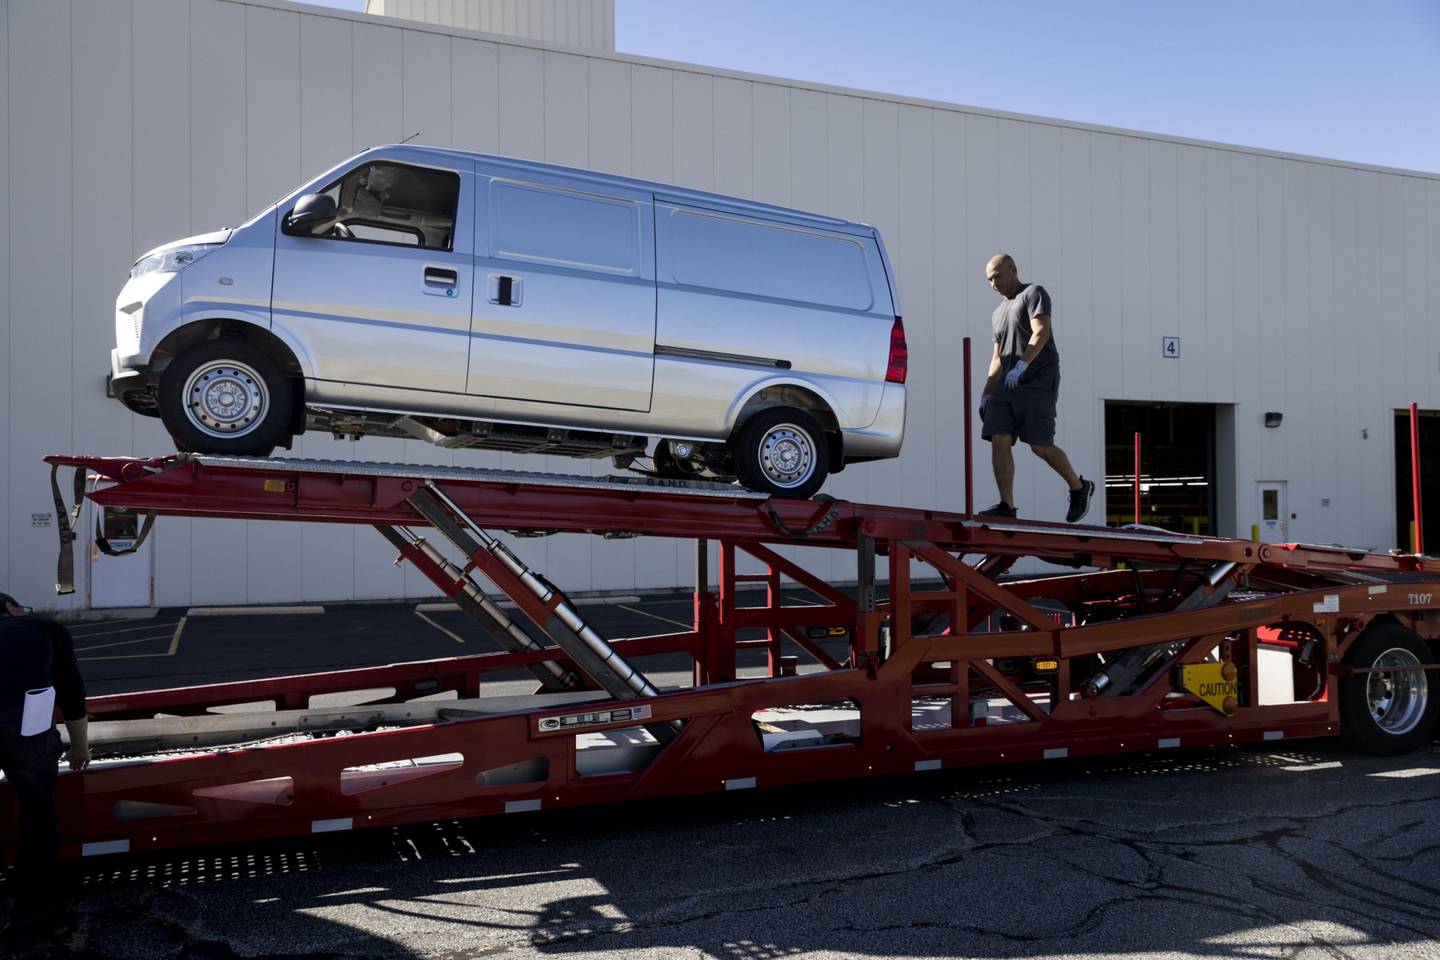 The first 1,000 ELMS vans off the production line are headed to Randy Marion Automotive Group in North Carolina. Photographer: Taylor Glascock/Bloombergdfd